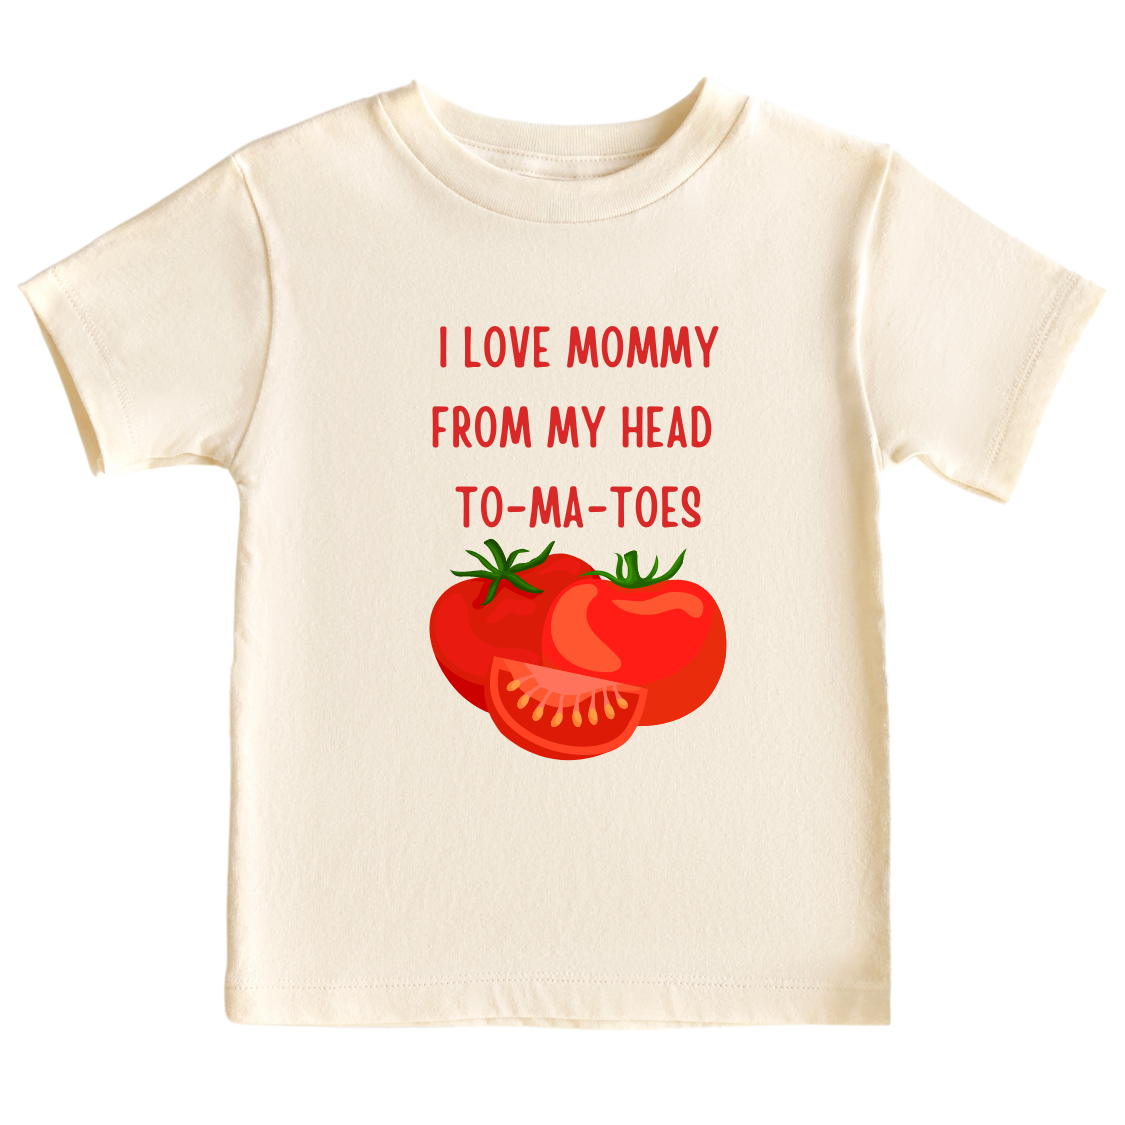 Tomato Baby Onesie® I Love Mommy From My Head To-Ma-Toes Shirt Baby Clothes Unisex Baby Announcement Gift for Mom Newborn Outfit